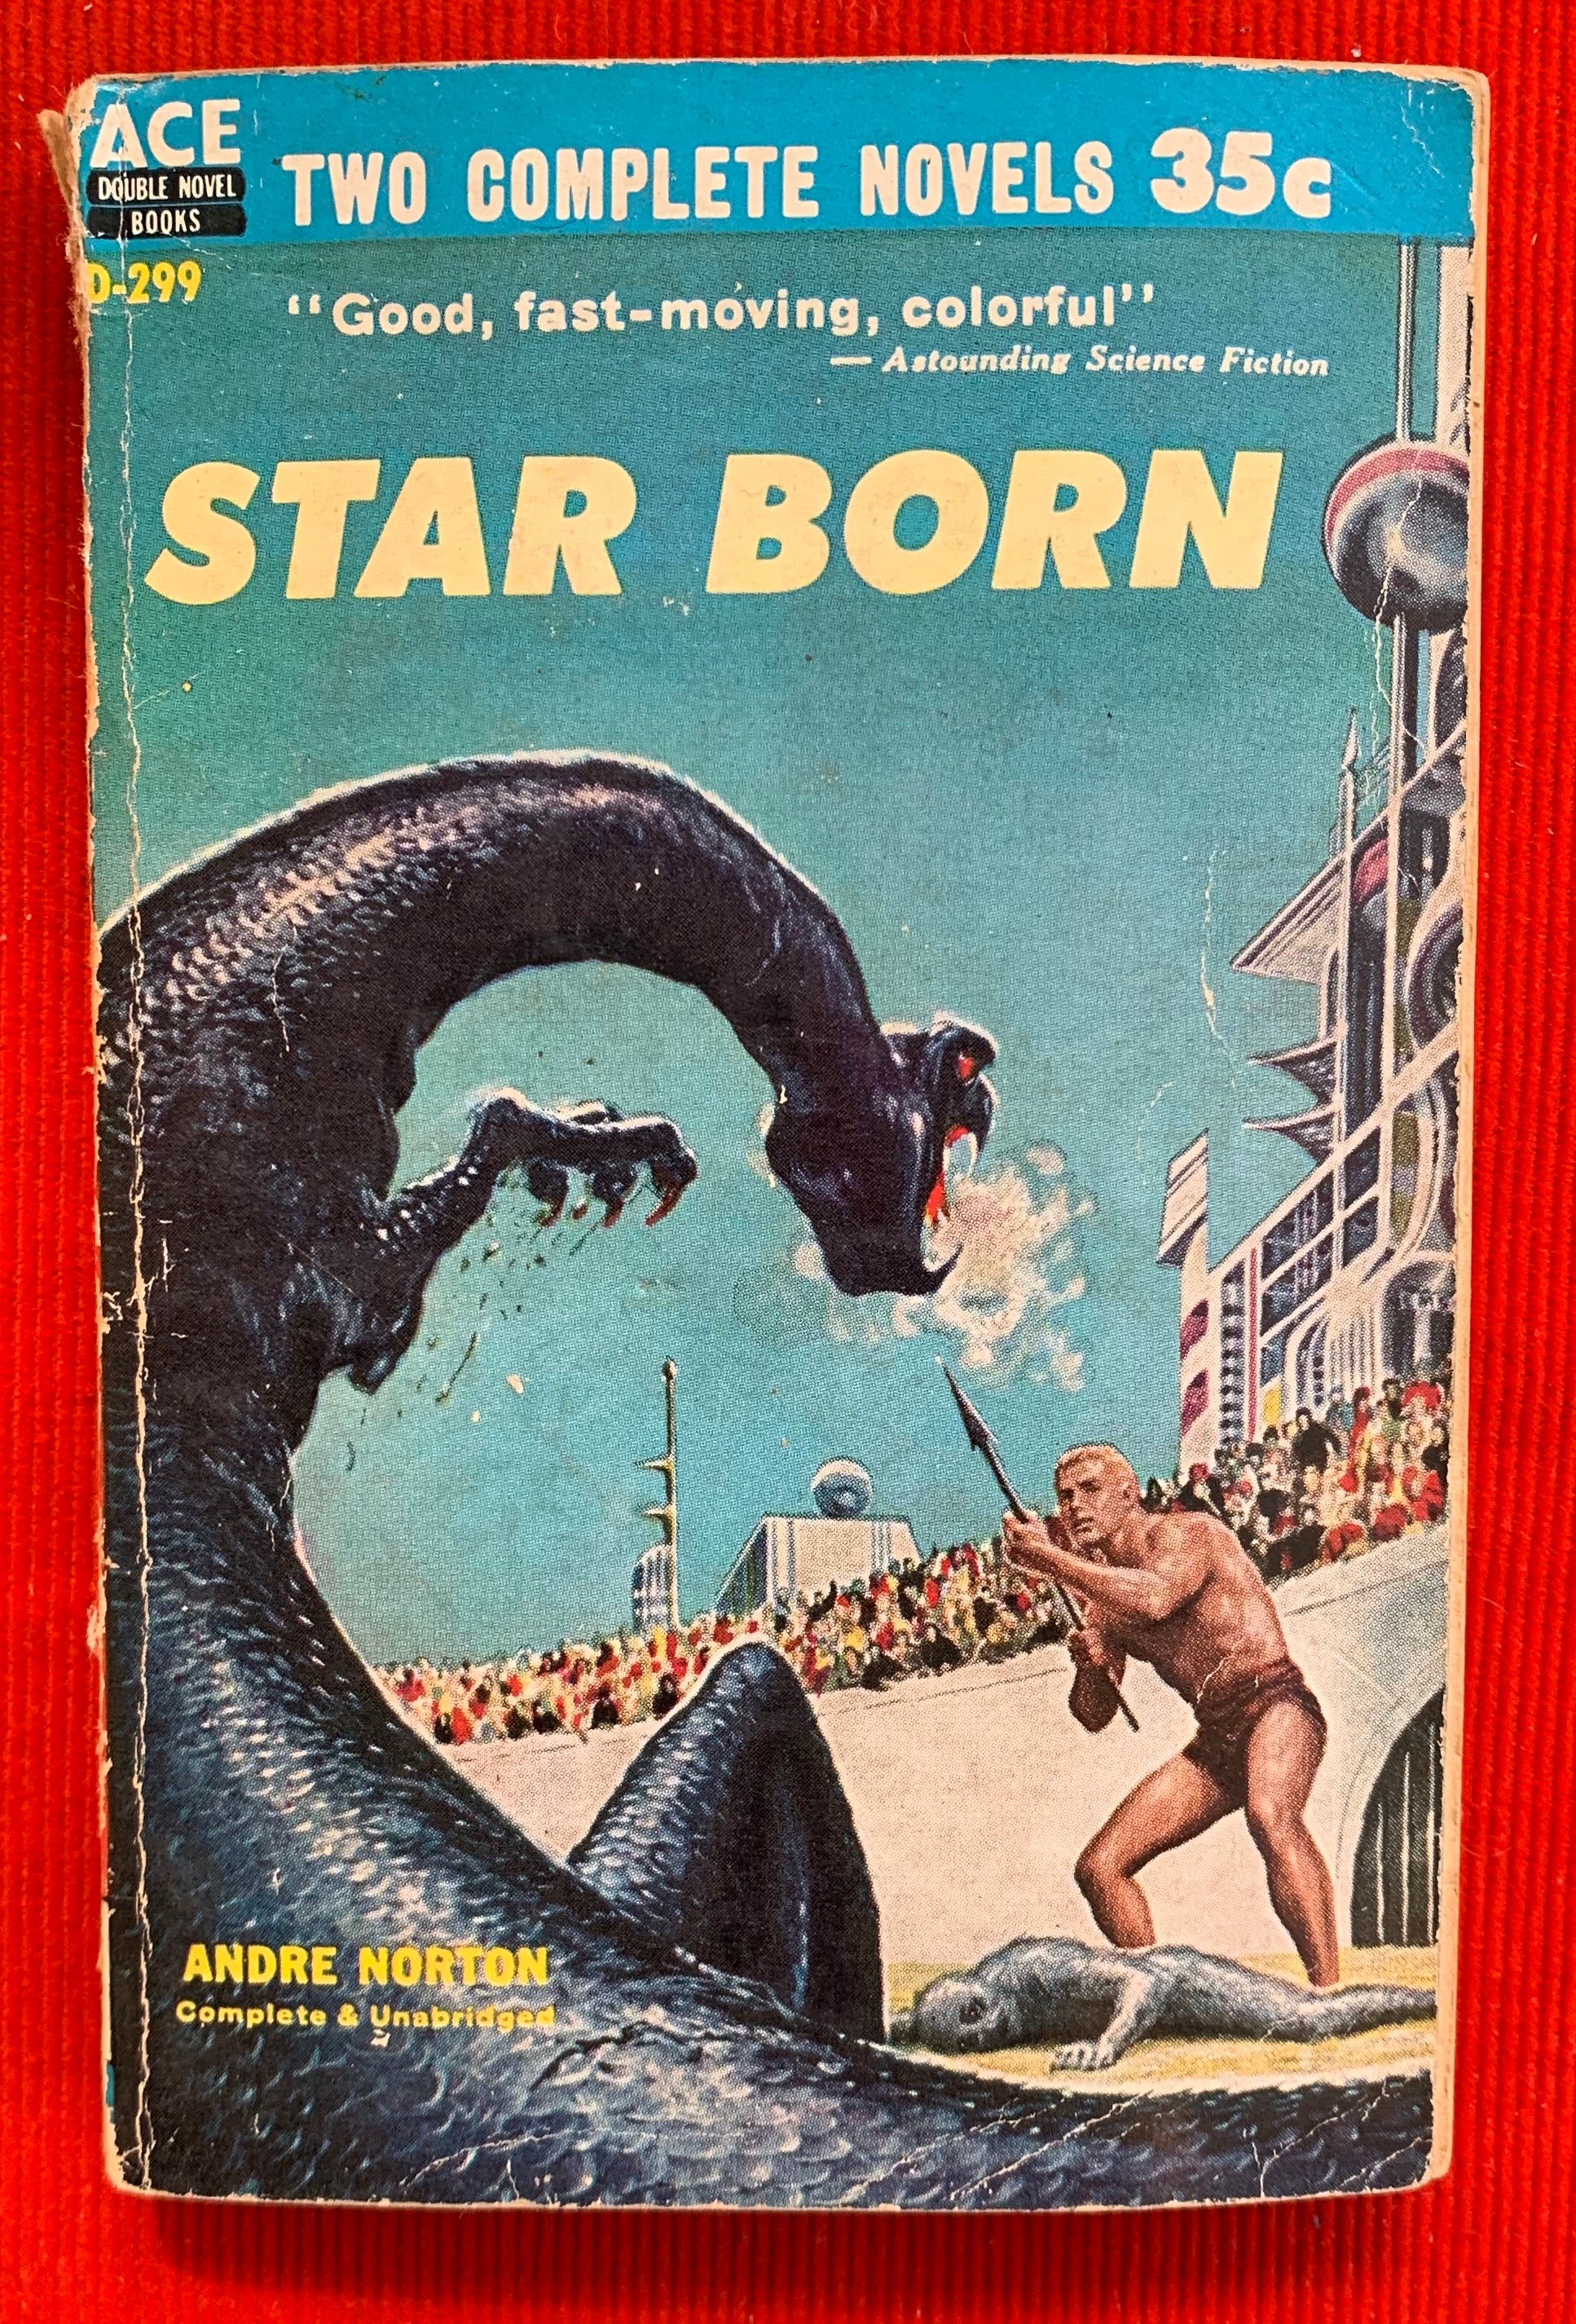 "A Planet For Texans" and "Star Born" by H. Beam Piper and John J. McGuire